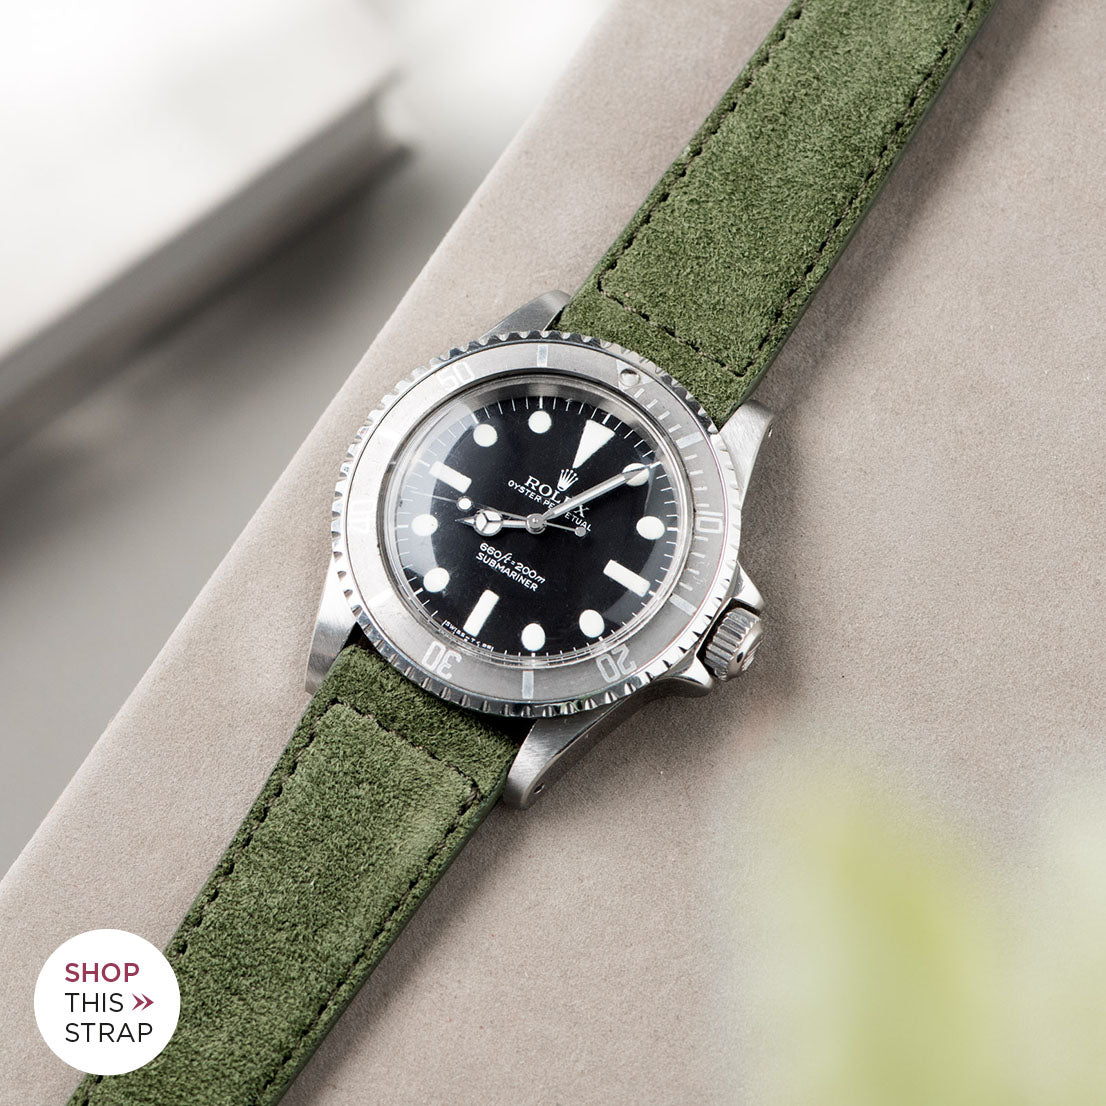 Bulang and Sons_Strap Guide_The Rolex 5513 Faded Maxi Submariner_Olive Drab Green Suede Leather Watch Strap